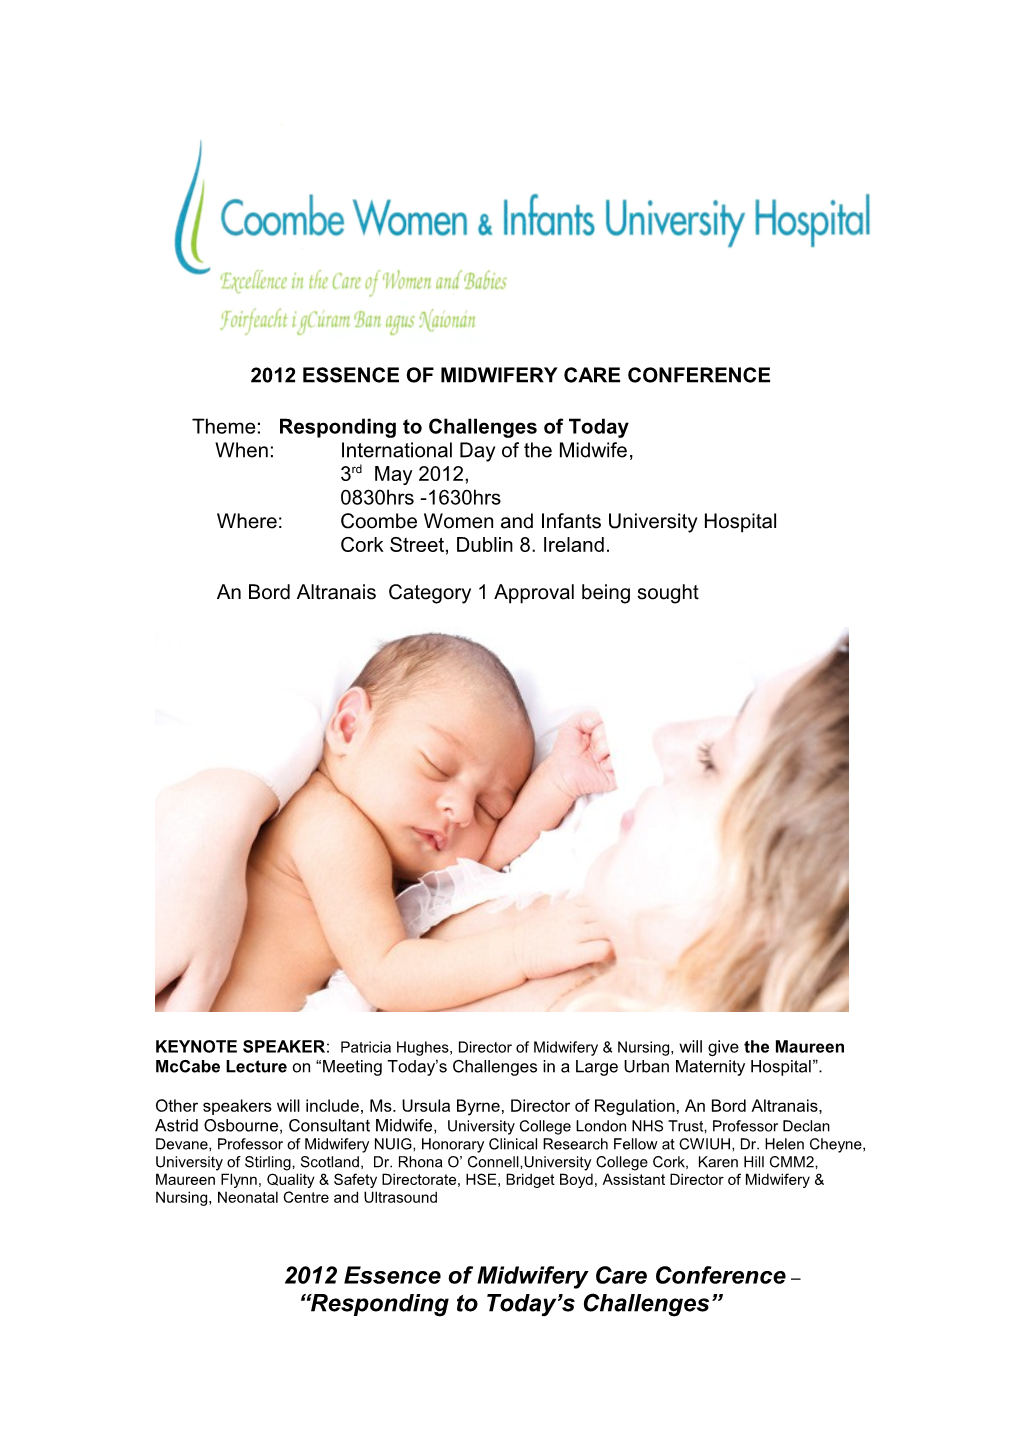 2012 Essence of Midwifery Care Conference